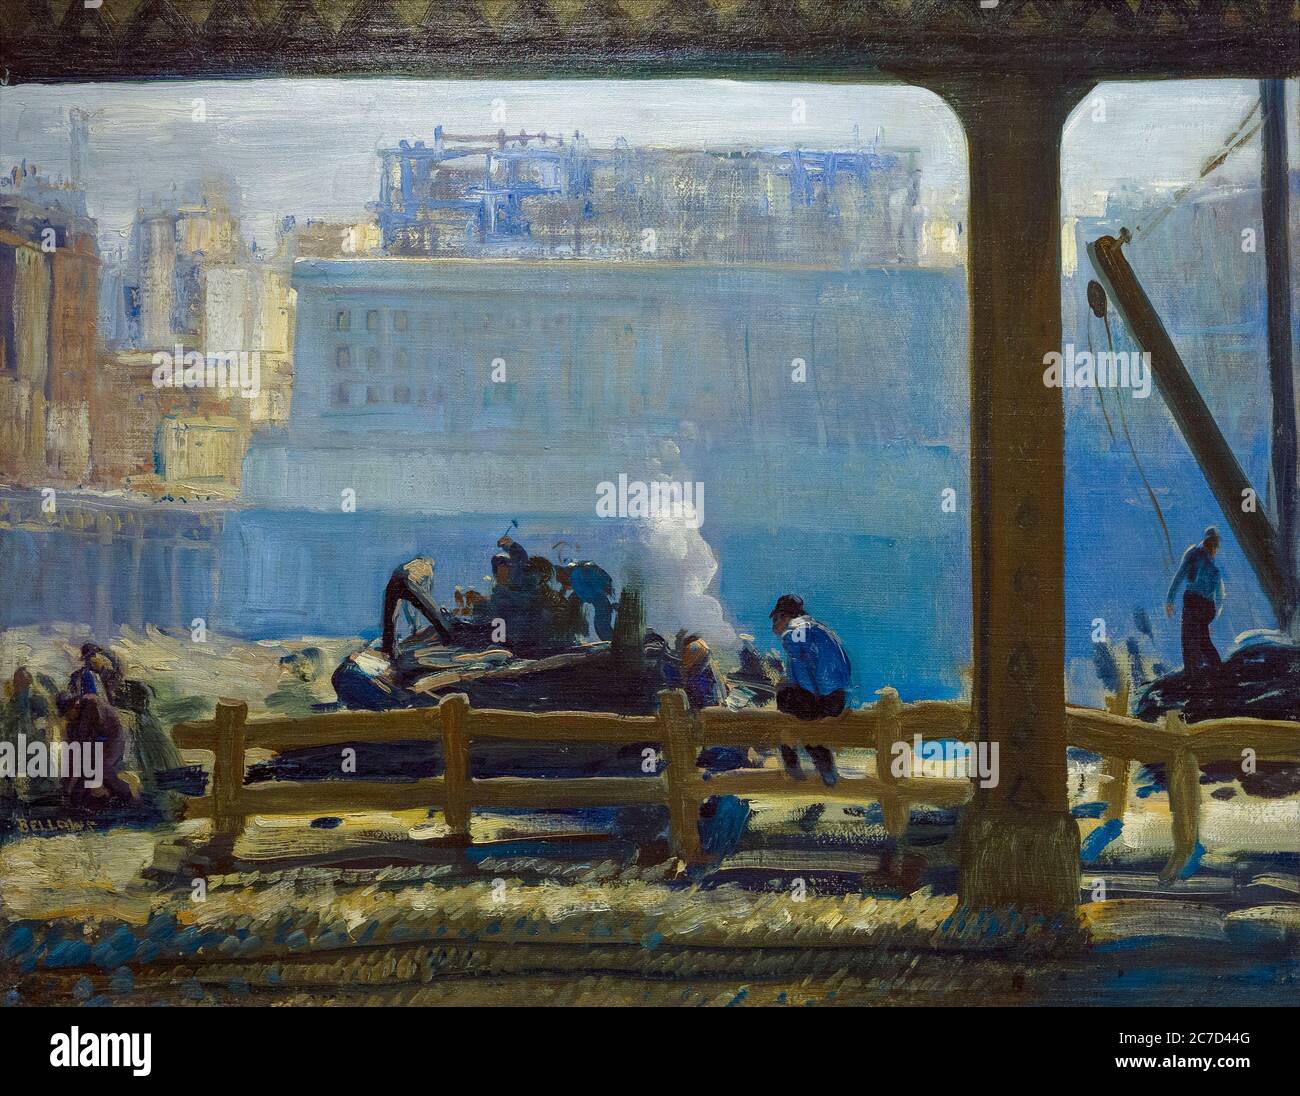 Blue Morning, George Bellows, 1909, National Gallery of Art, Washington DC, USA, North America Stock Photo